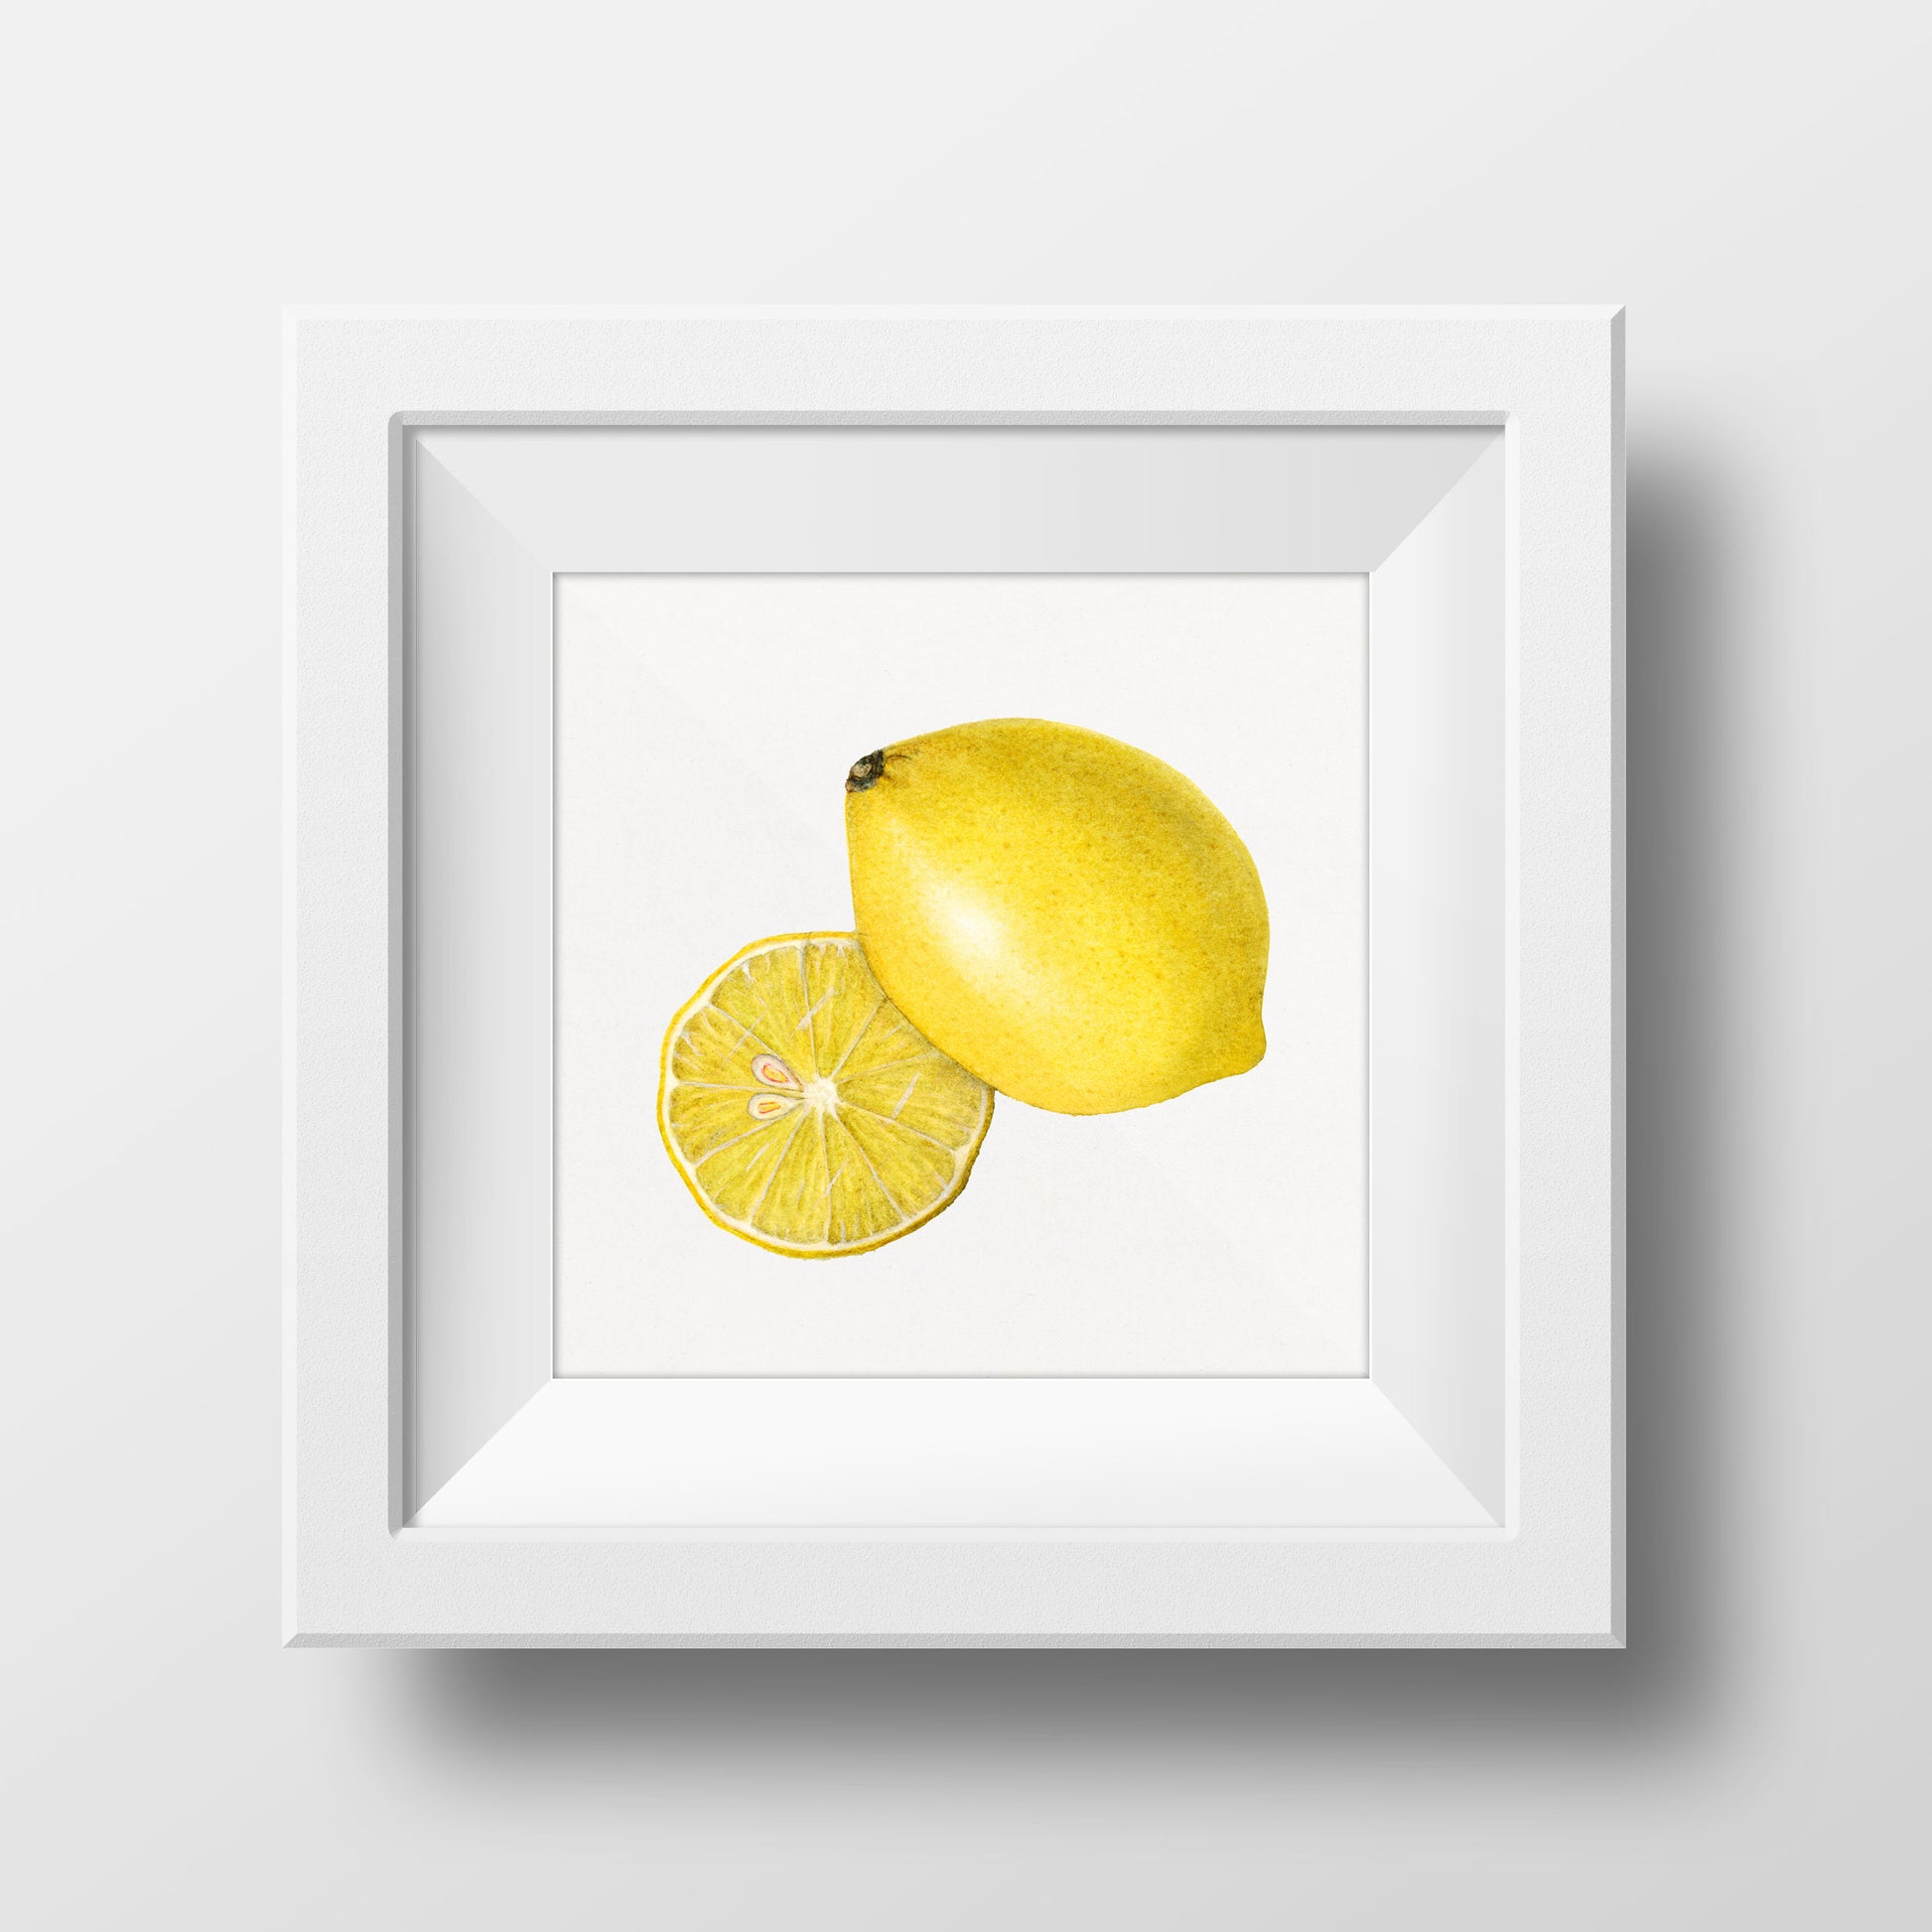 ‘When Life Gives You Lemons’ Wall Gallery